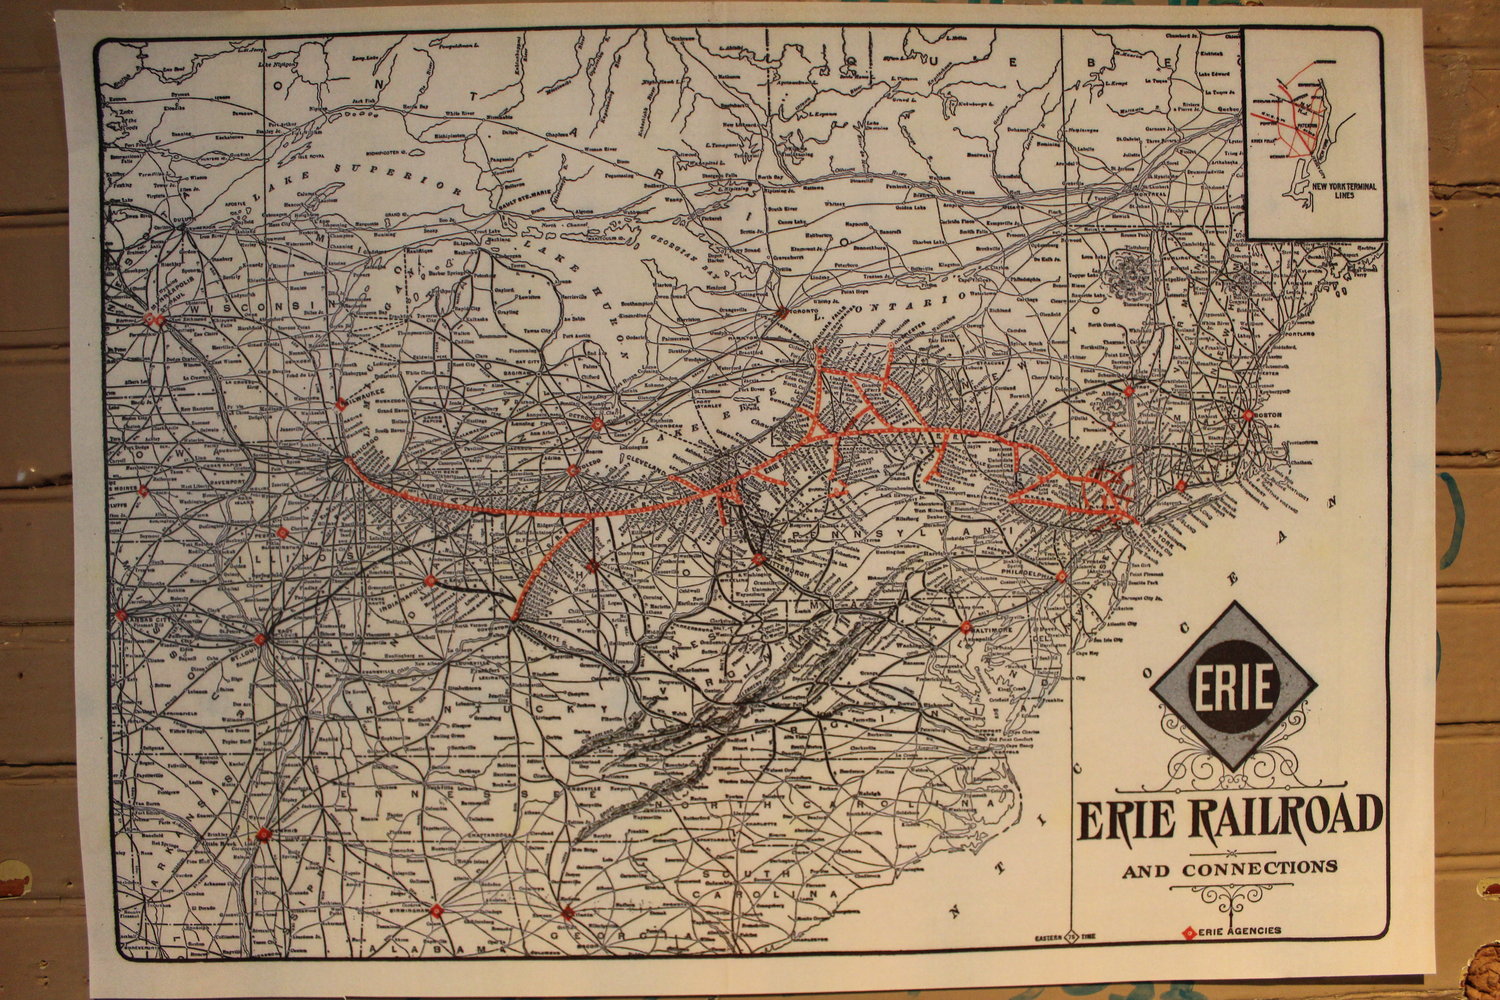 The Erie’s path is marked on a map next to the ticket window, locating communities that are still around, like Callicoon and Narrowsburg and Lackawaxen. And communities that are gone, like Starbush...